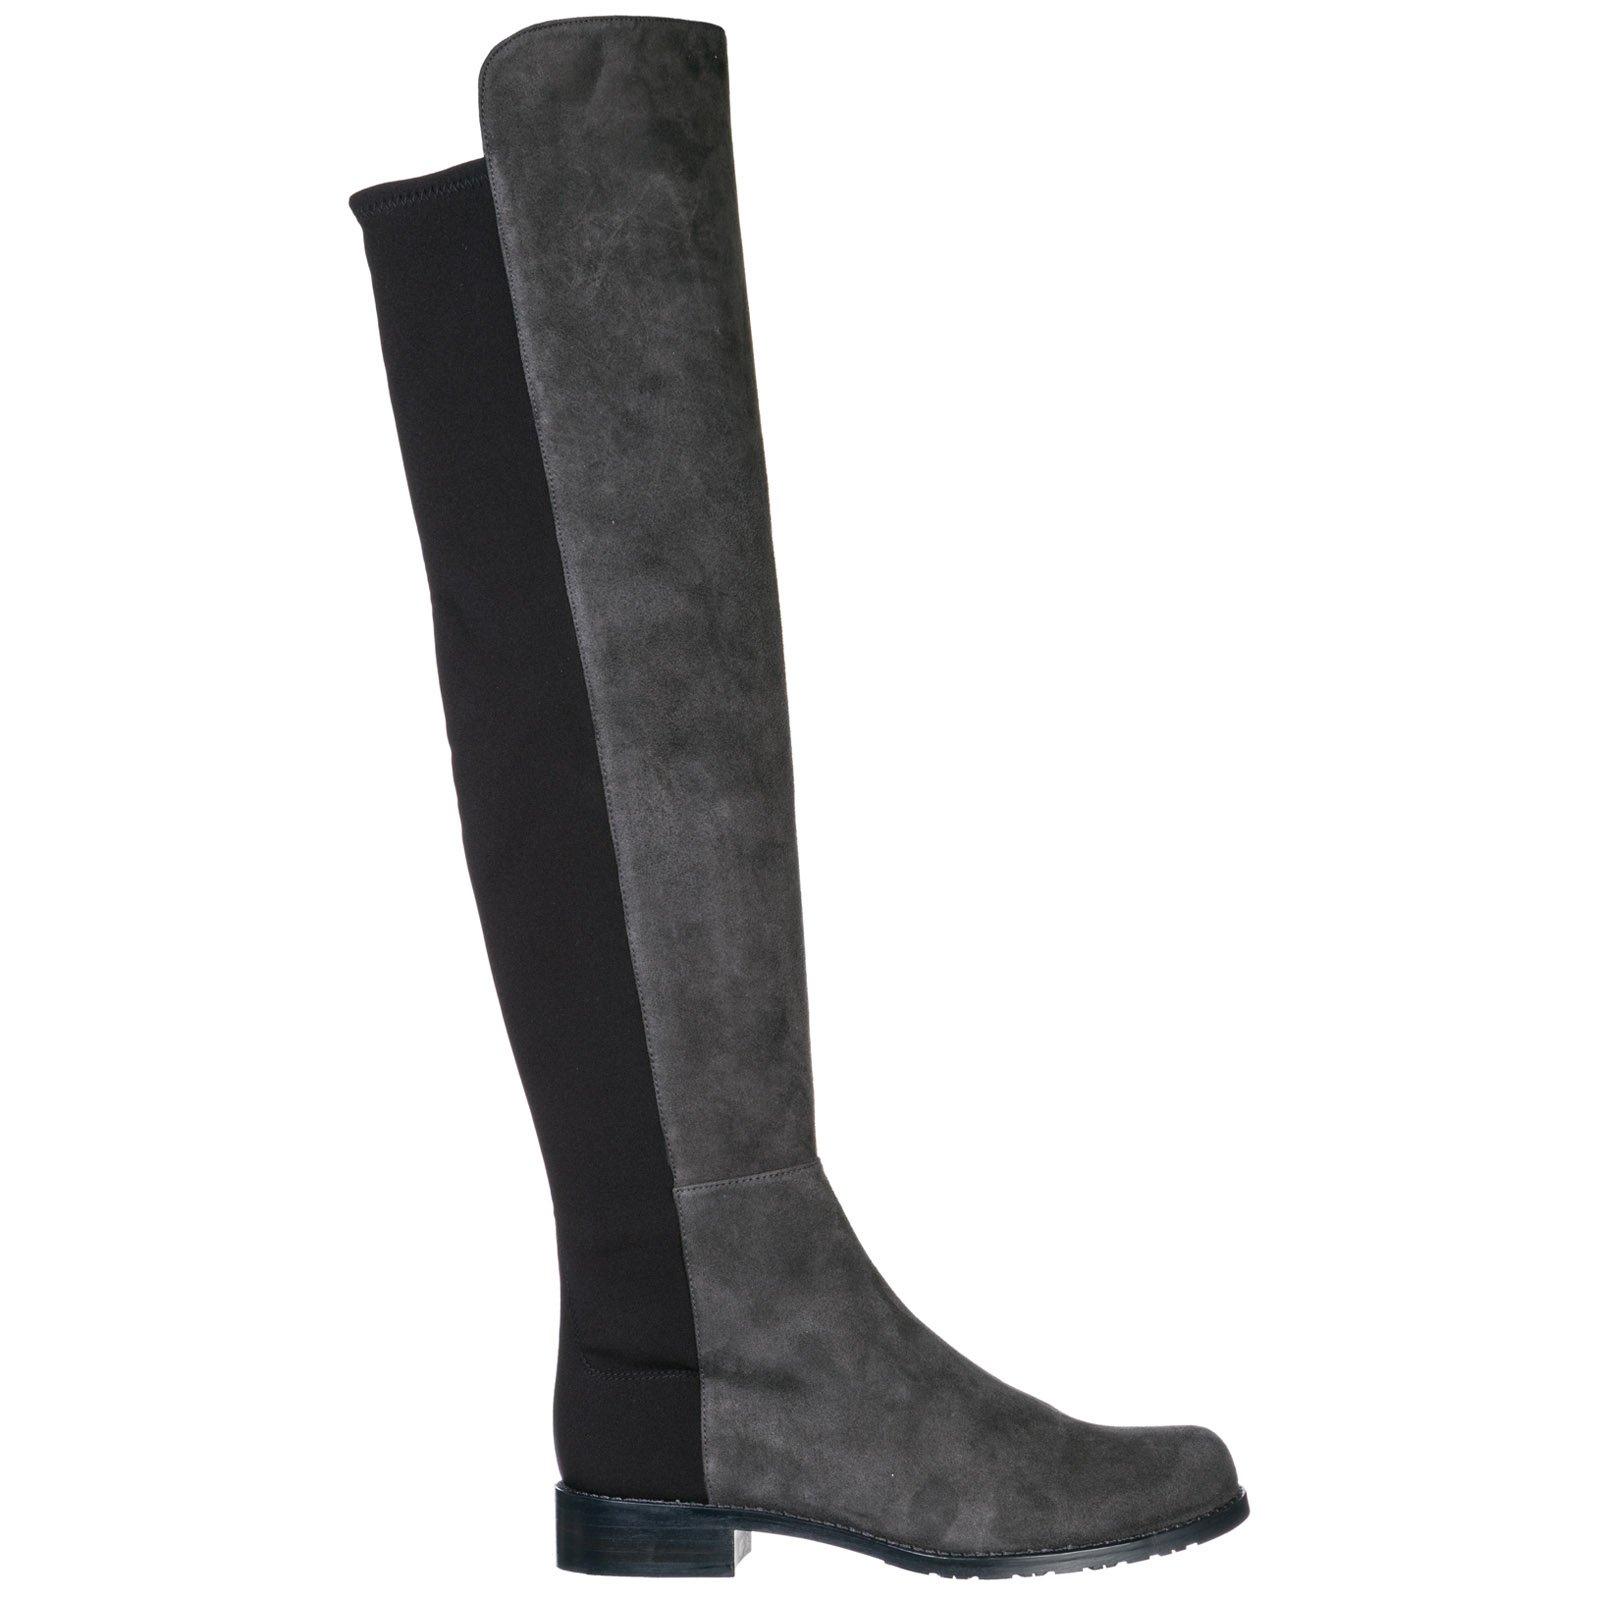 Stuart Weitzman Leather 5050 Thigh-high Boots in Grey (Gray) - Lyst